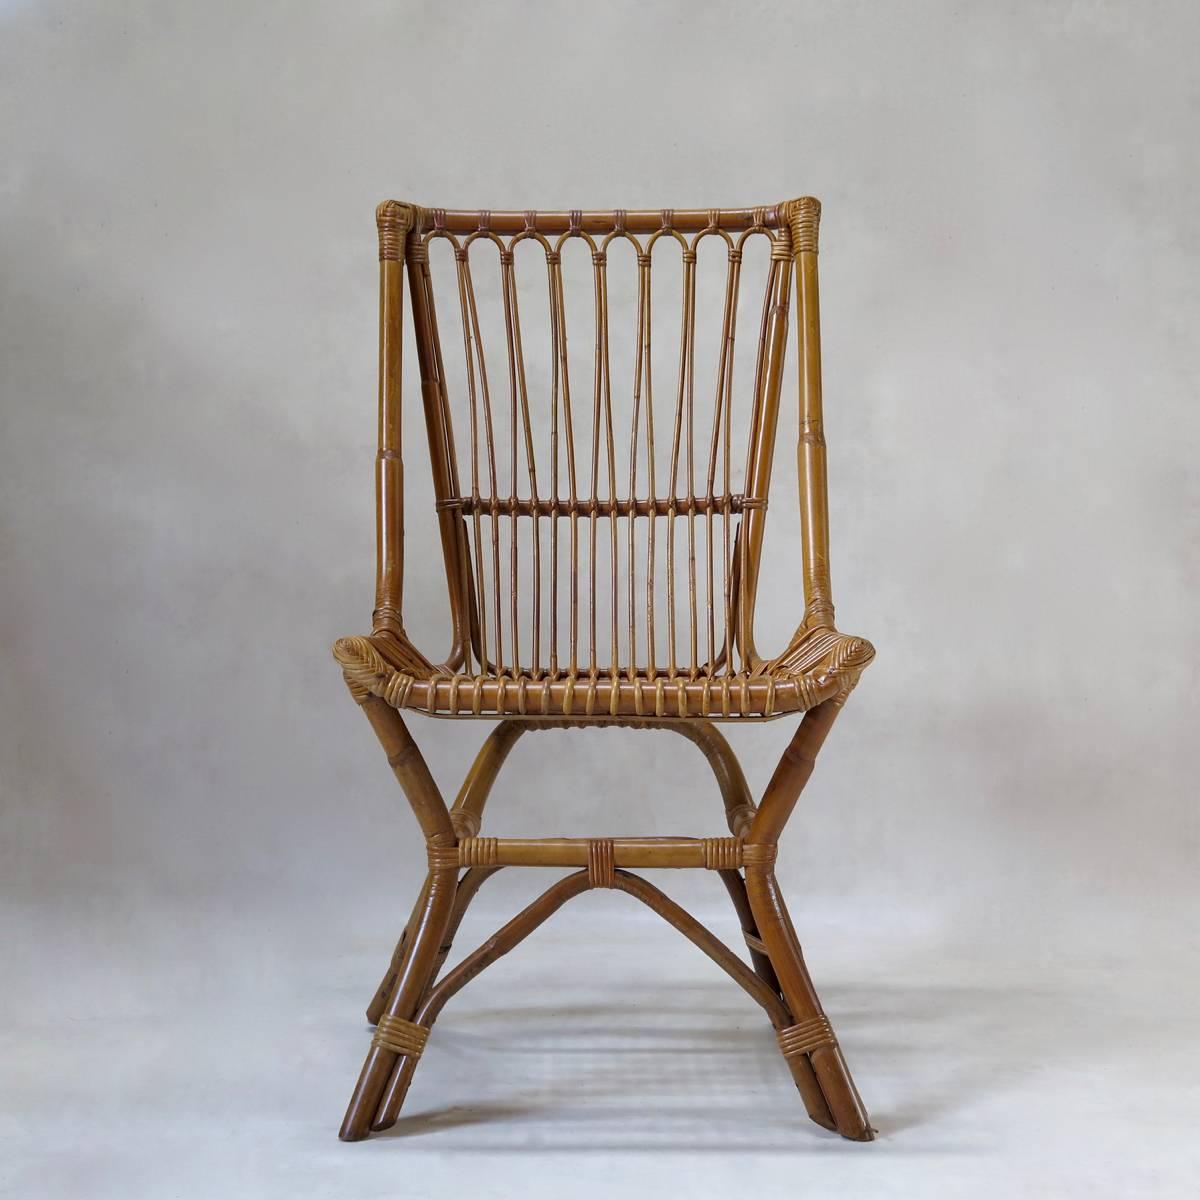 Set of six nicely-designed wicker dining chairs from the 1950s, with stabile splayed legs and upward-curving seats. Wide and comfortable seats.